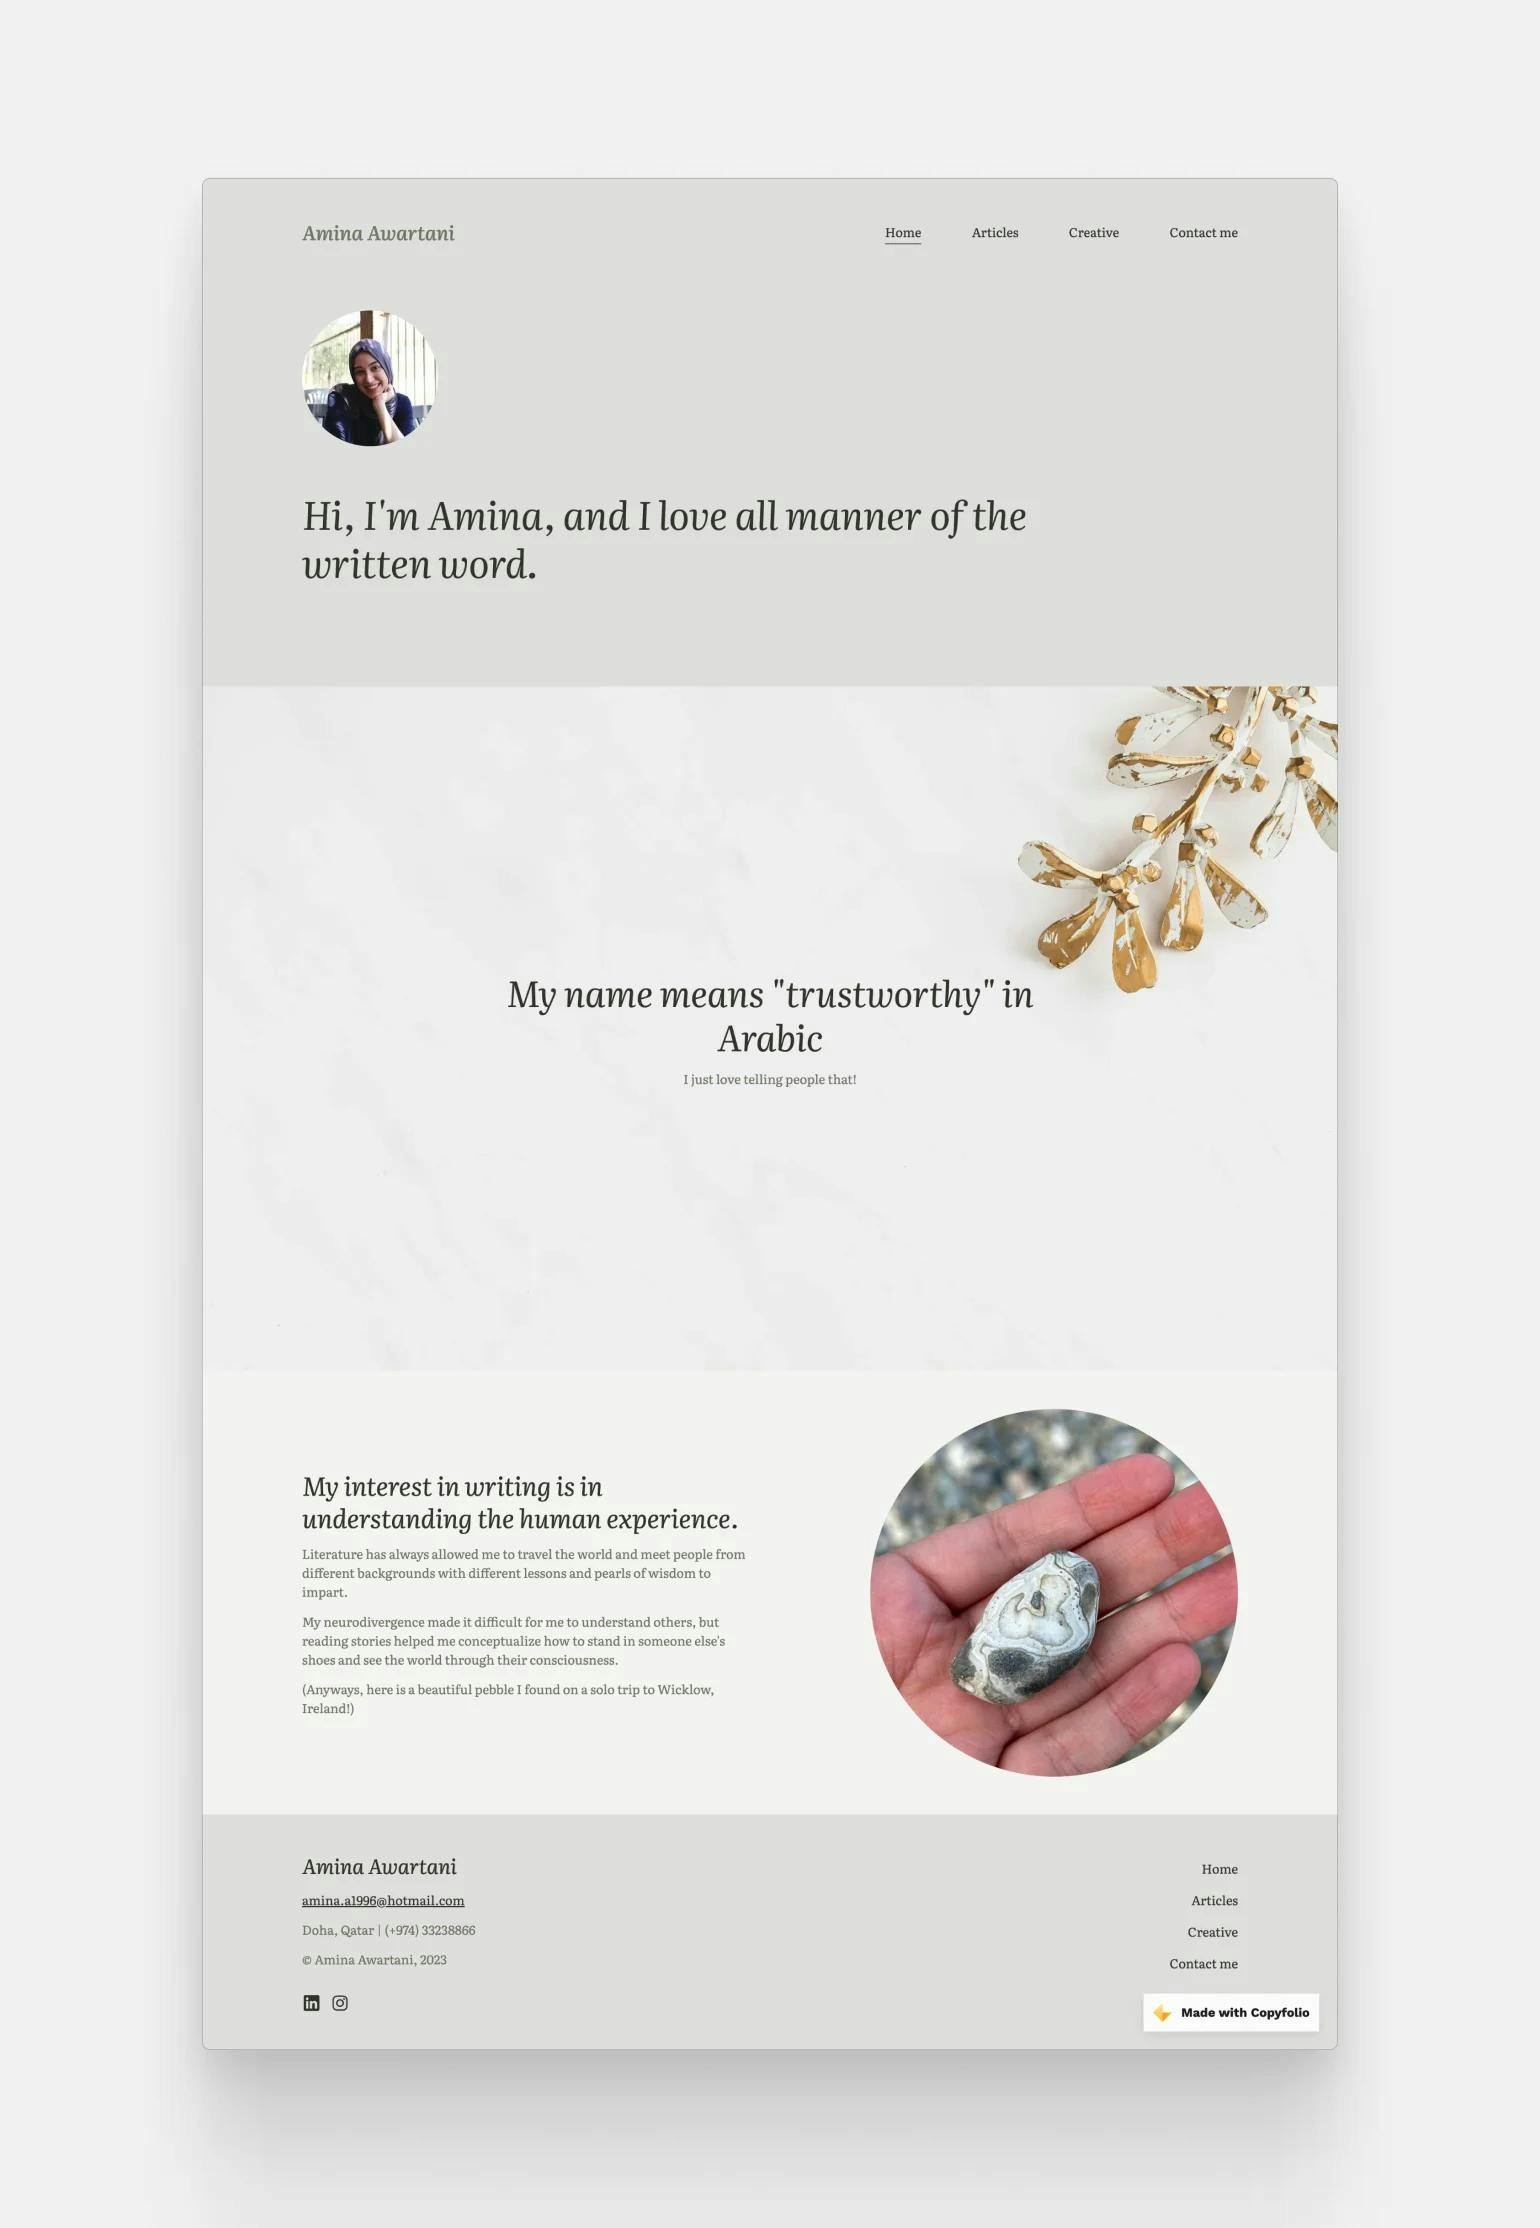 The professional writer website of Amina, built with Copyfolio